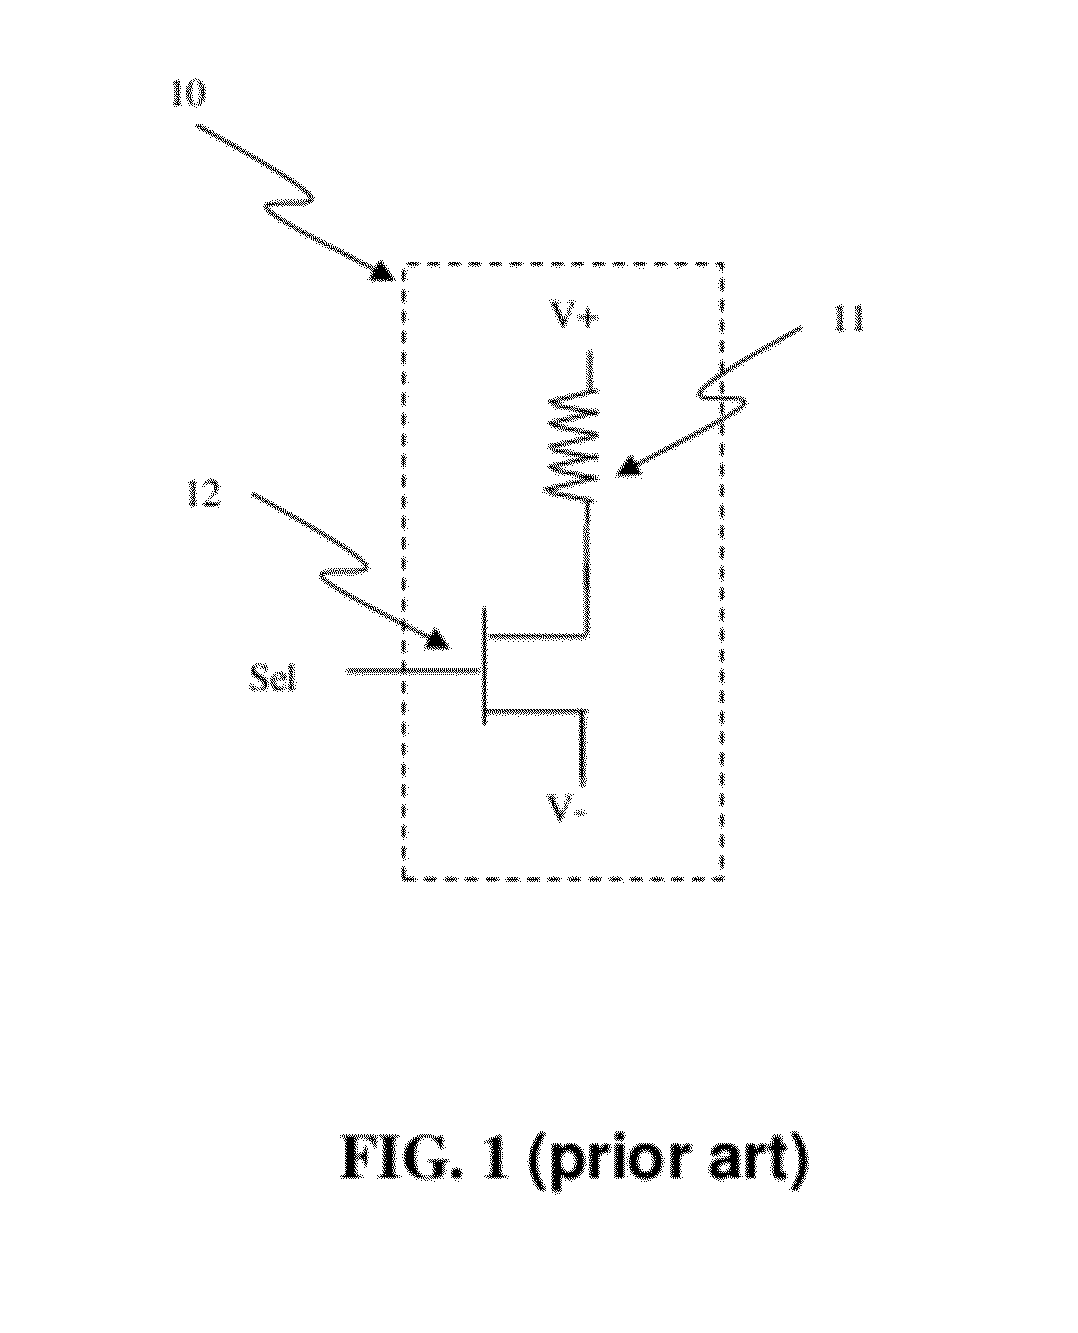 Programmably reversible resistive device cells using CMOS logic processes